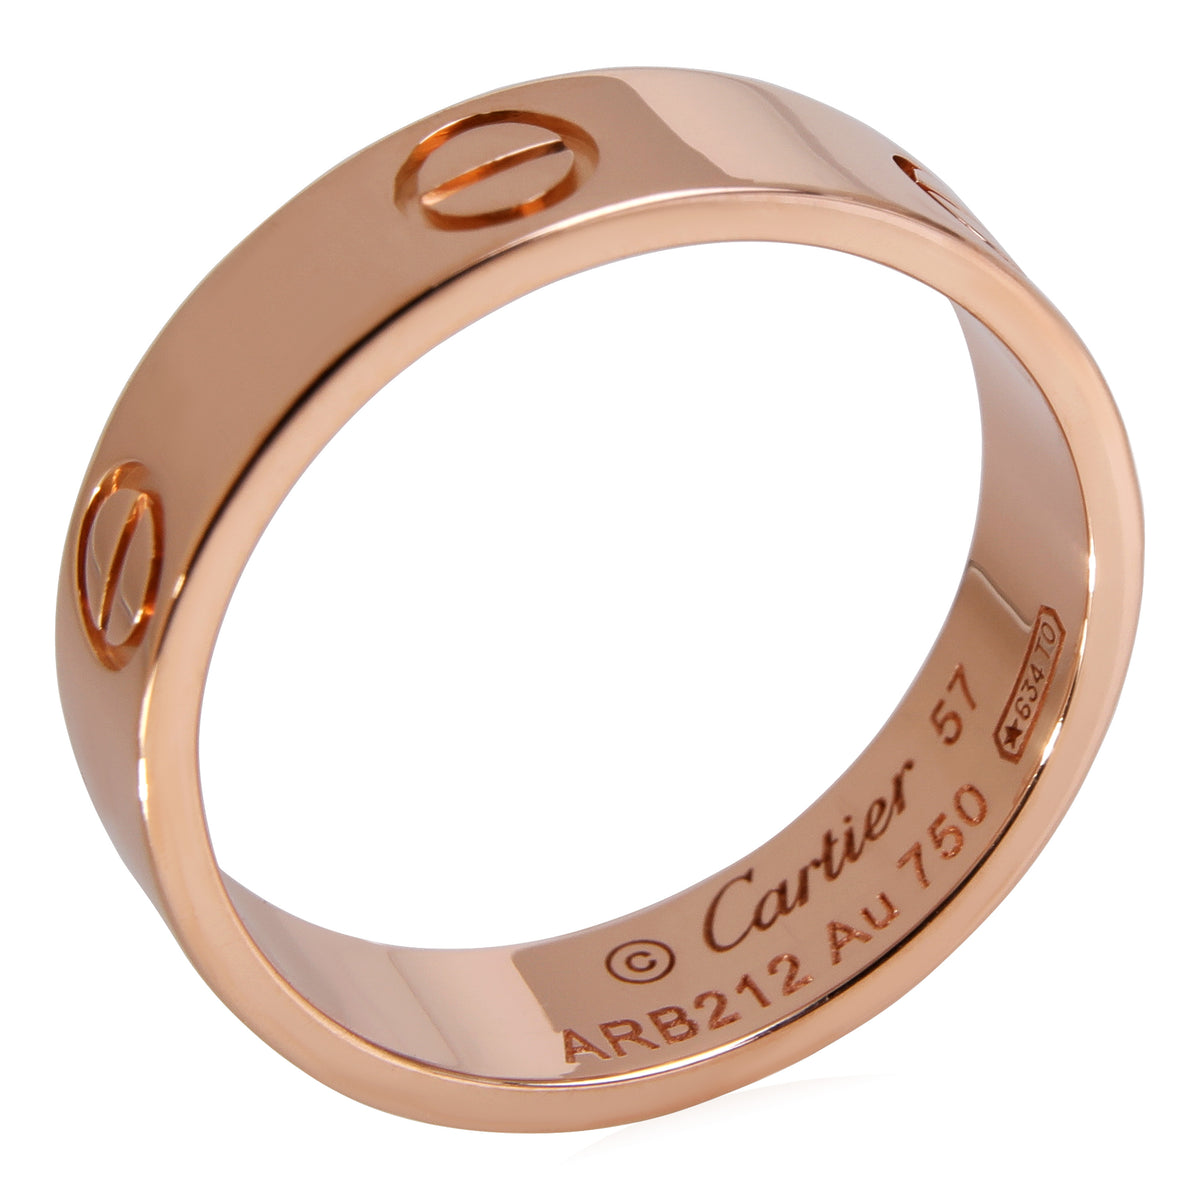 Cartier Love Ring in 18k Rose Gold